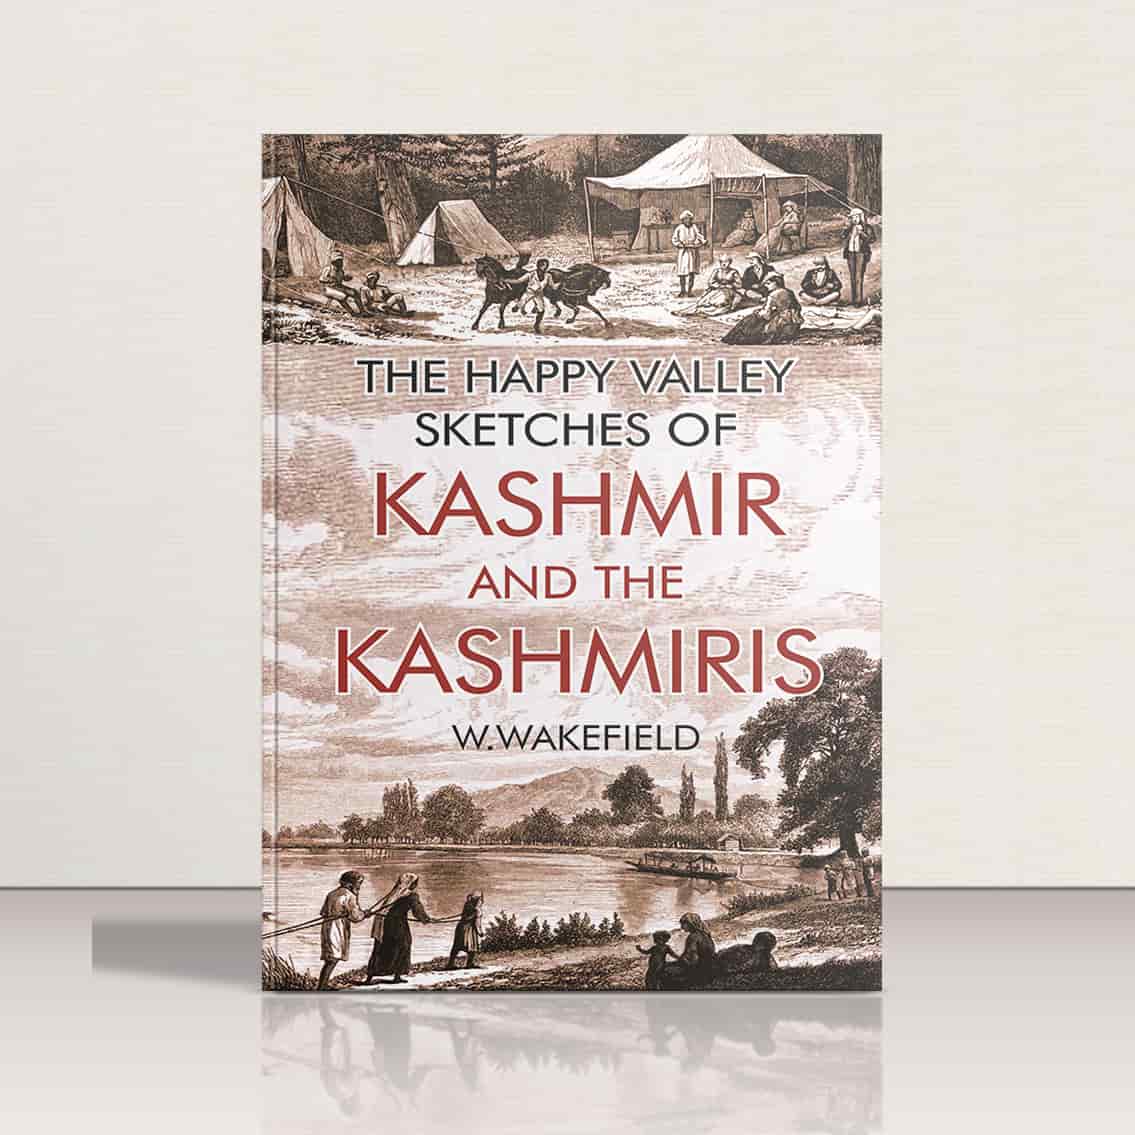 The Happy Valley Sketches of Kashmir & the Kashmiris